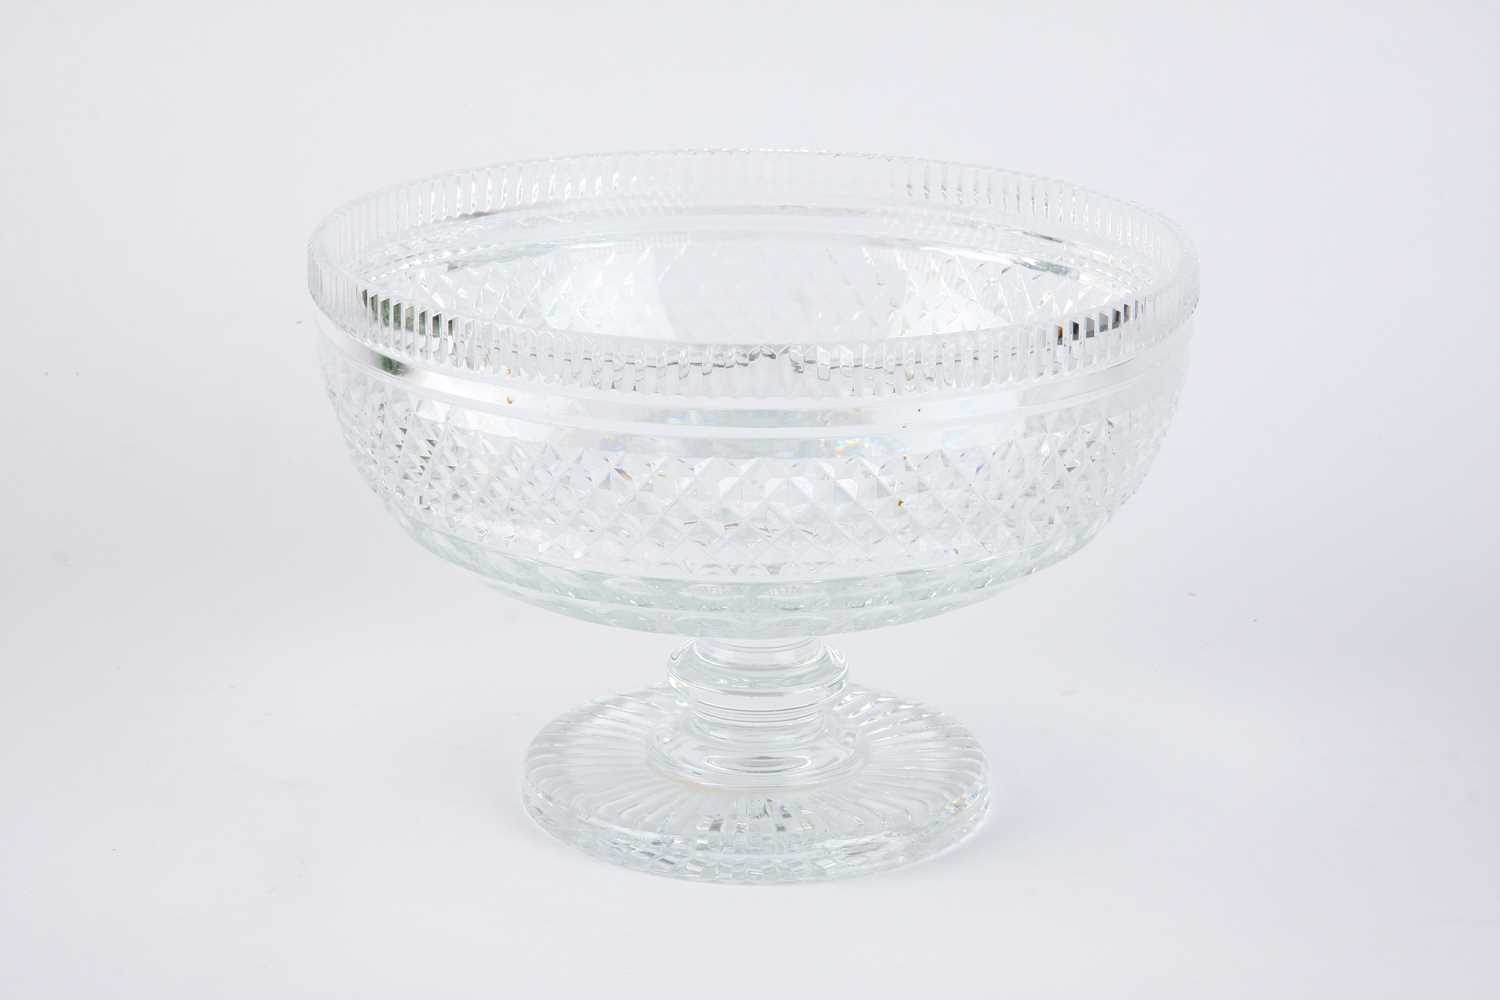 Lot 21 - ,A modern clear cut glass punch bowl cut with lattice and printies bands on a spreading foot with cut patterened base